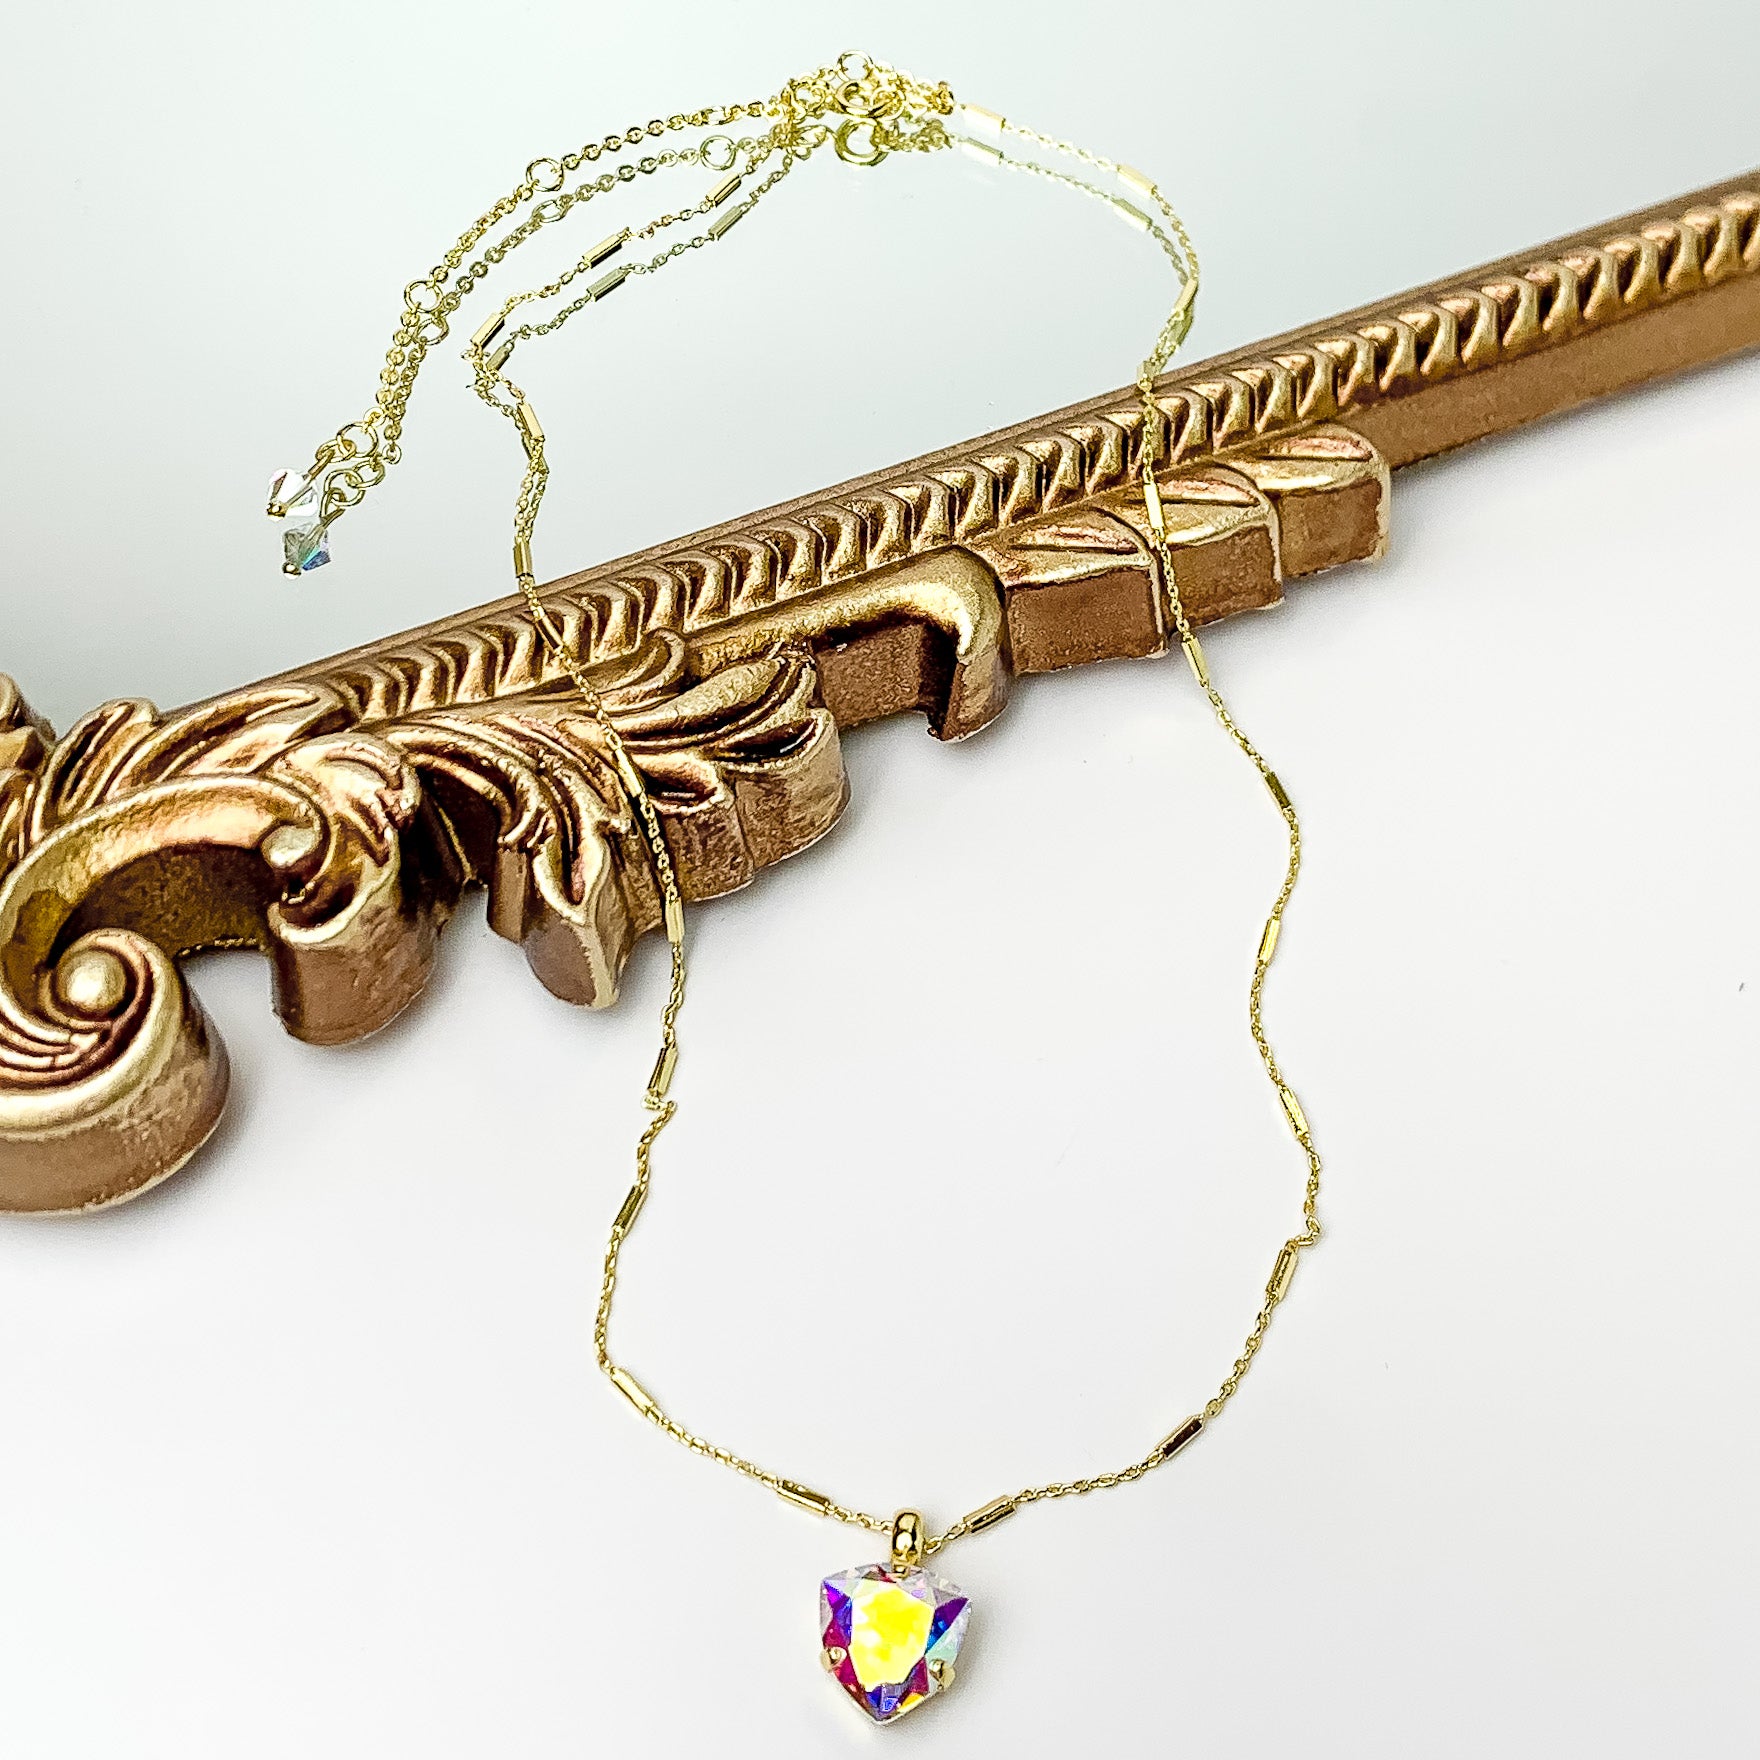 Pictured is a gold, bar chain necklace with a heart ab crystal pendant. This necklace is pictured partially Laying on a gold mirror on a white background. 